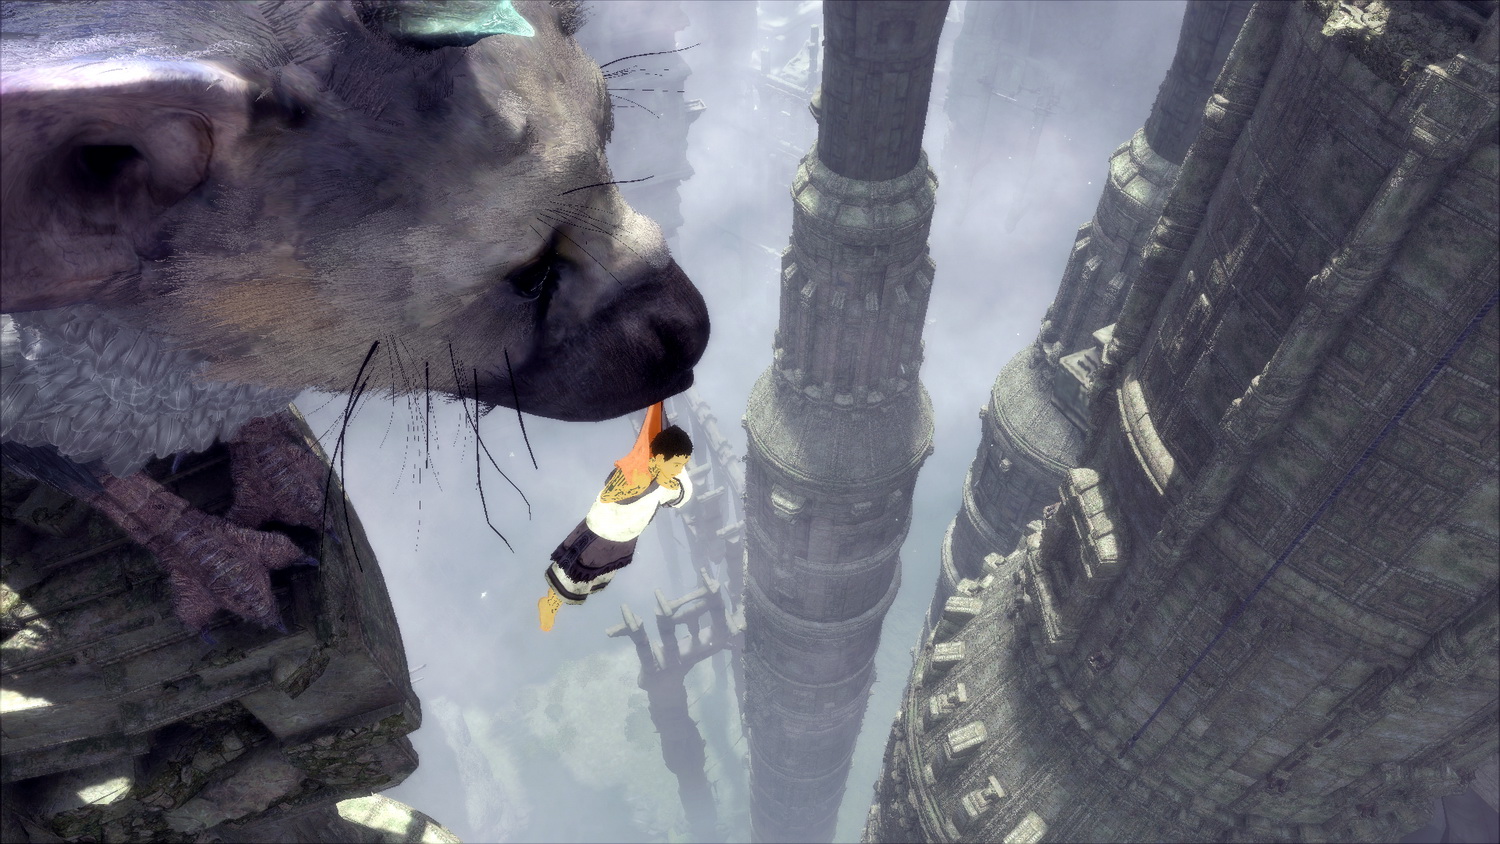 The Last Guardian Best Hits Sony Playstation 4 PS4 Games From Japan USED